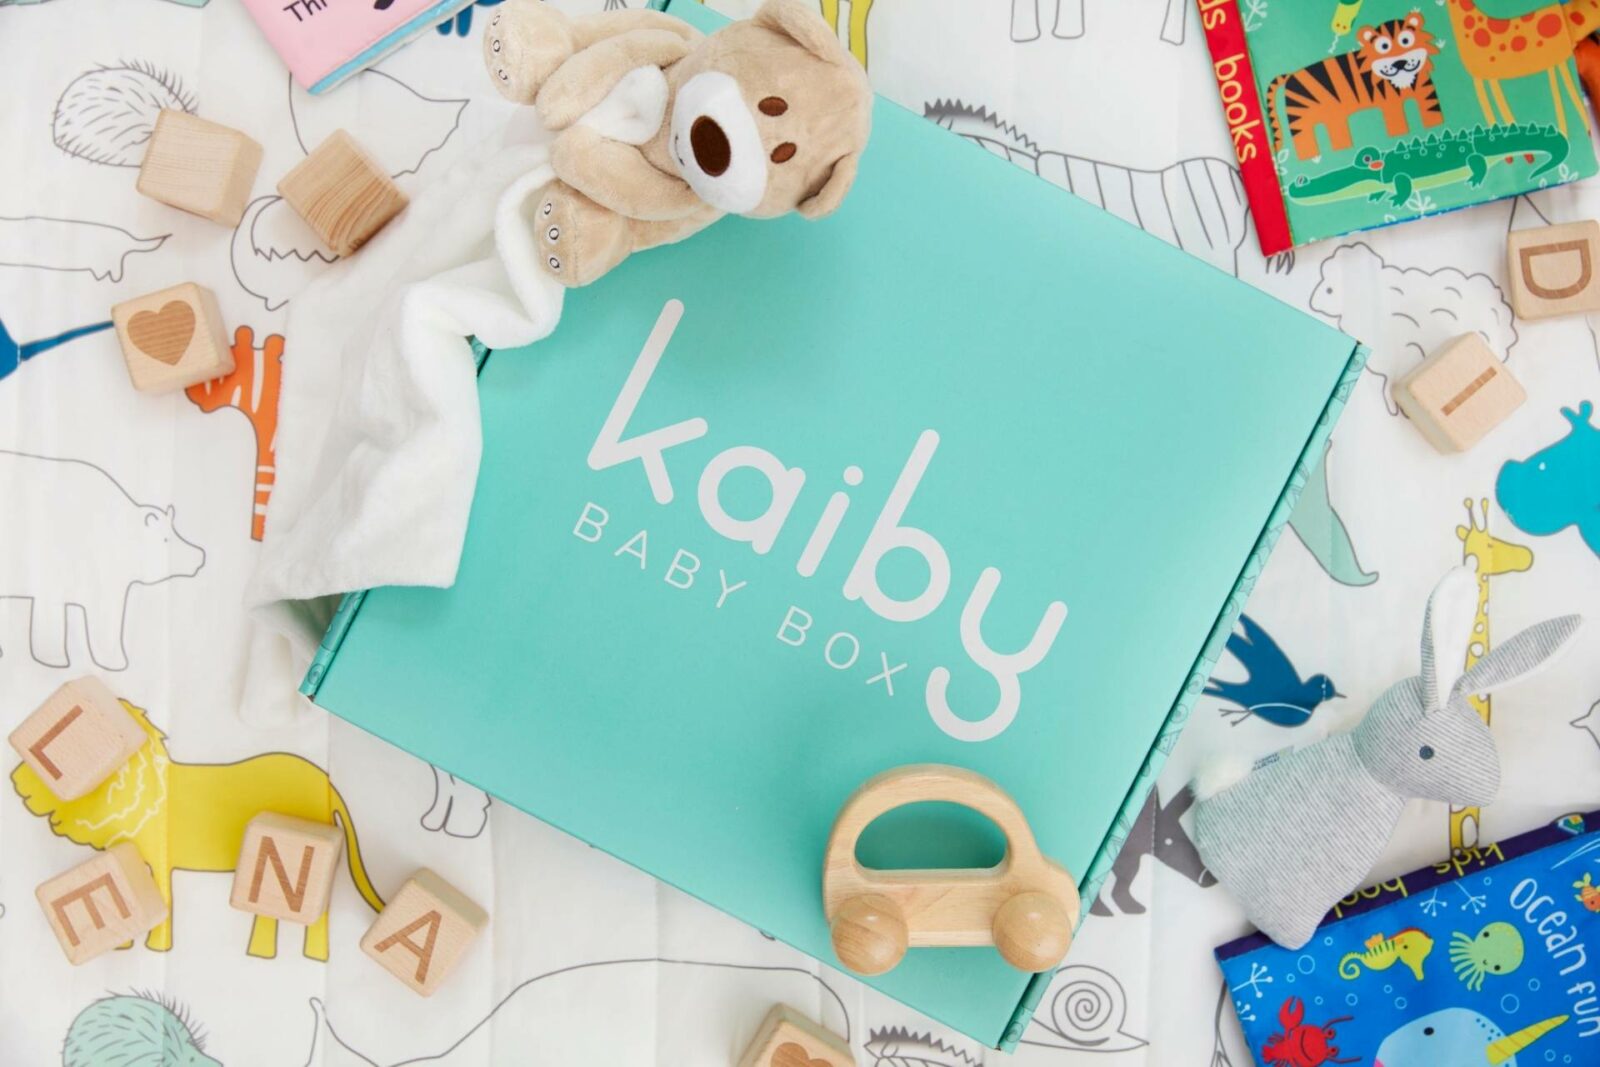 Kaiby Box Gift Box and Toys